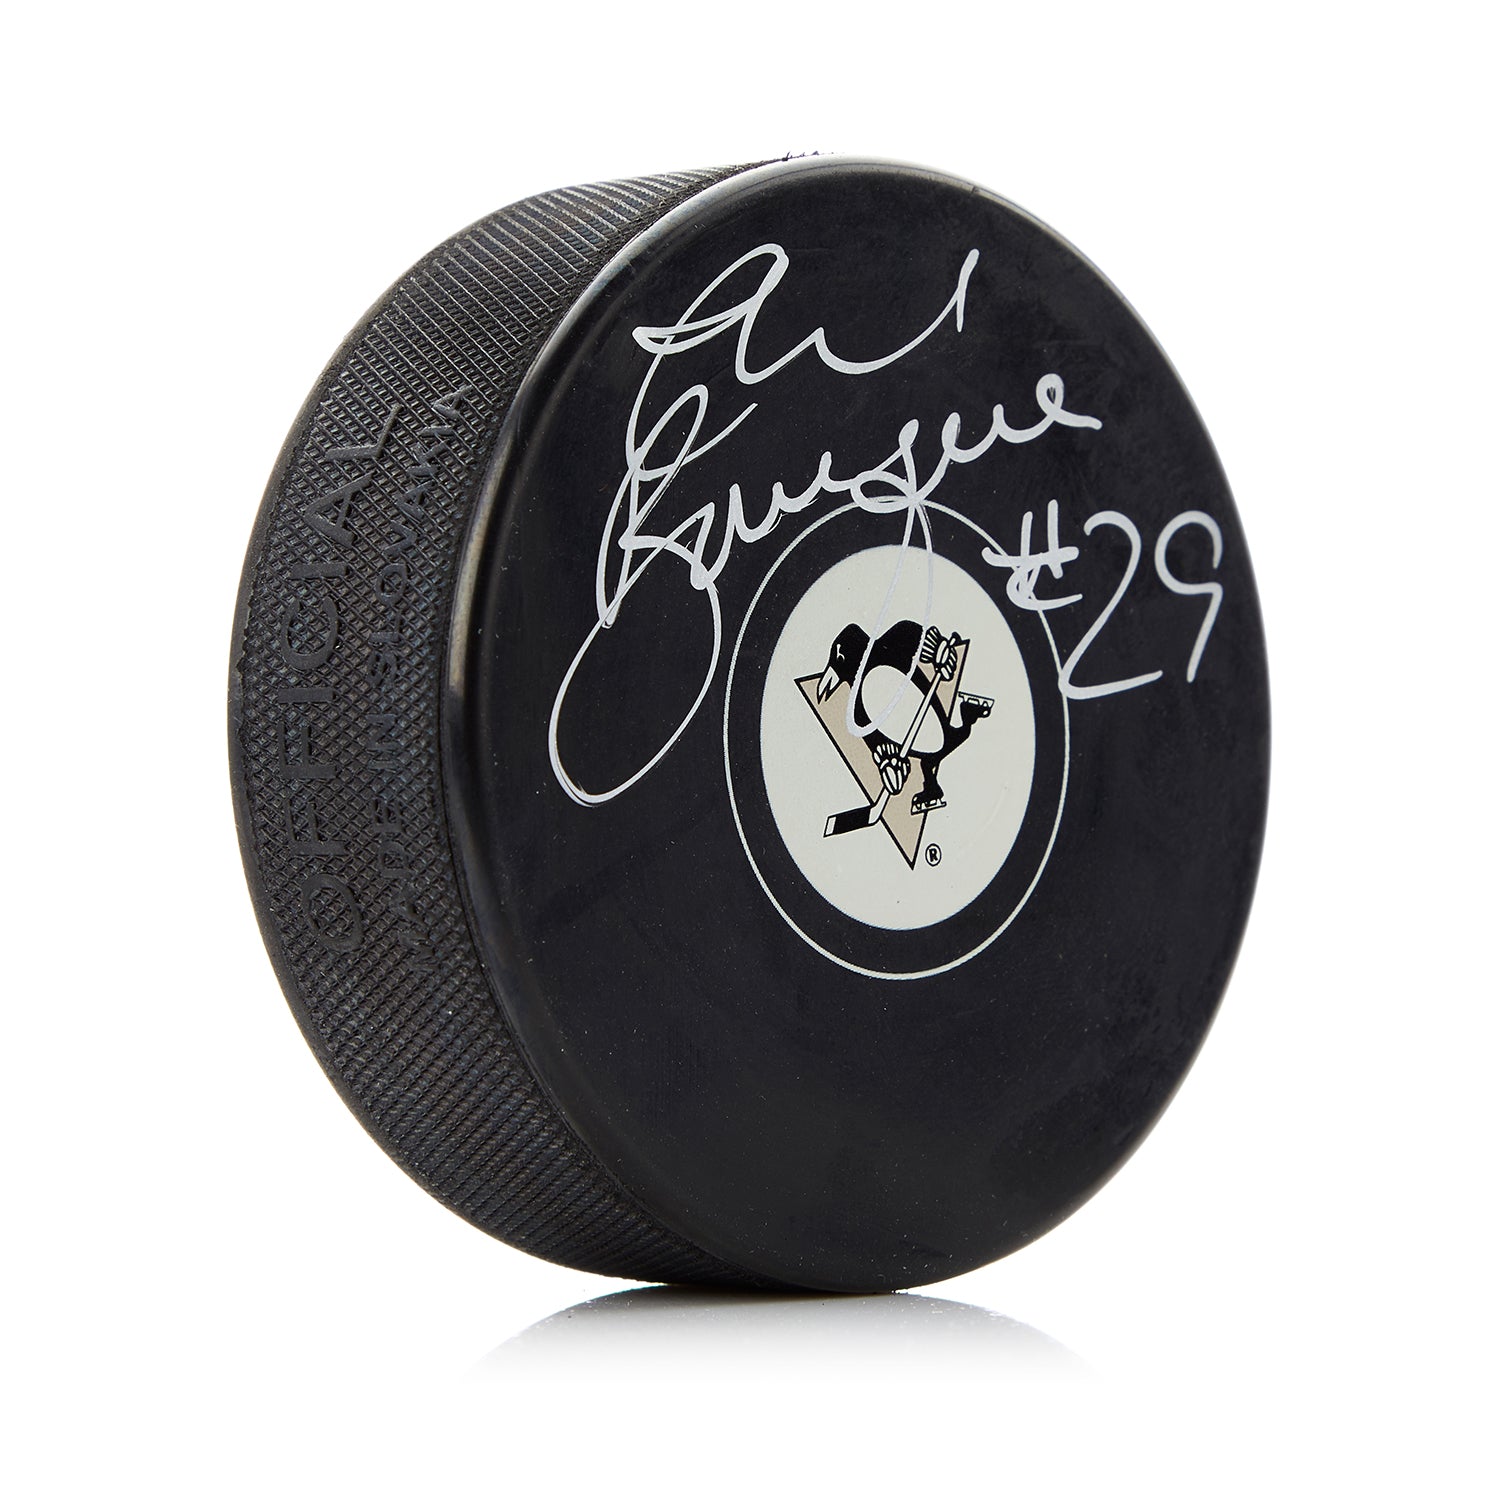 Phil Bourque Autographed Pittsburgh Penguins Hockey Puck